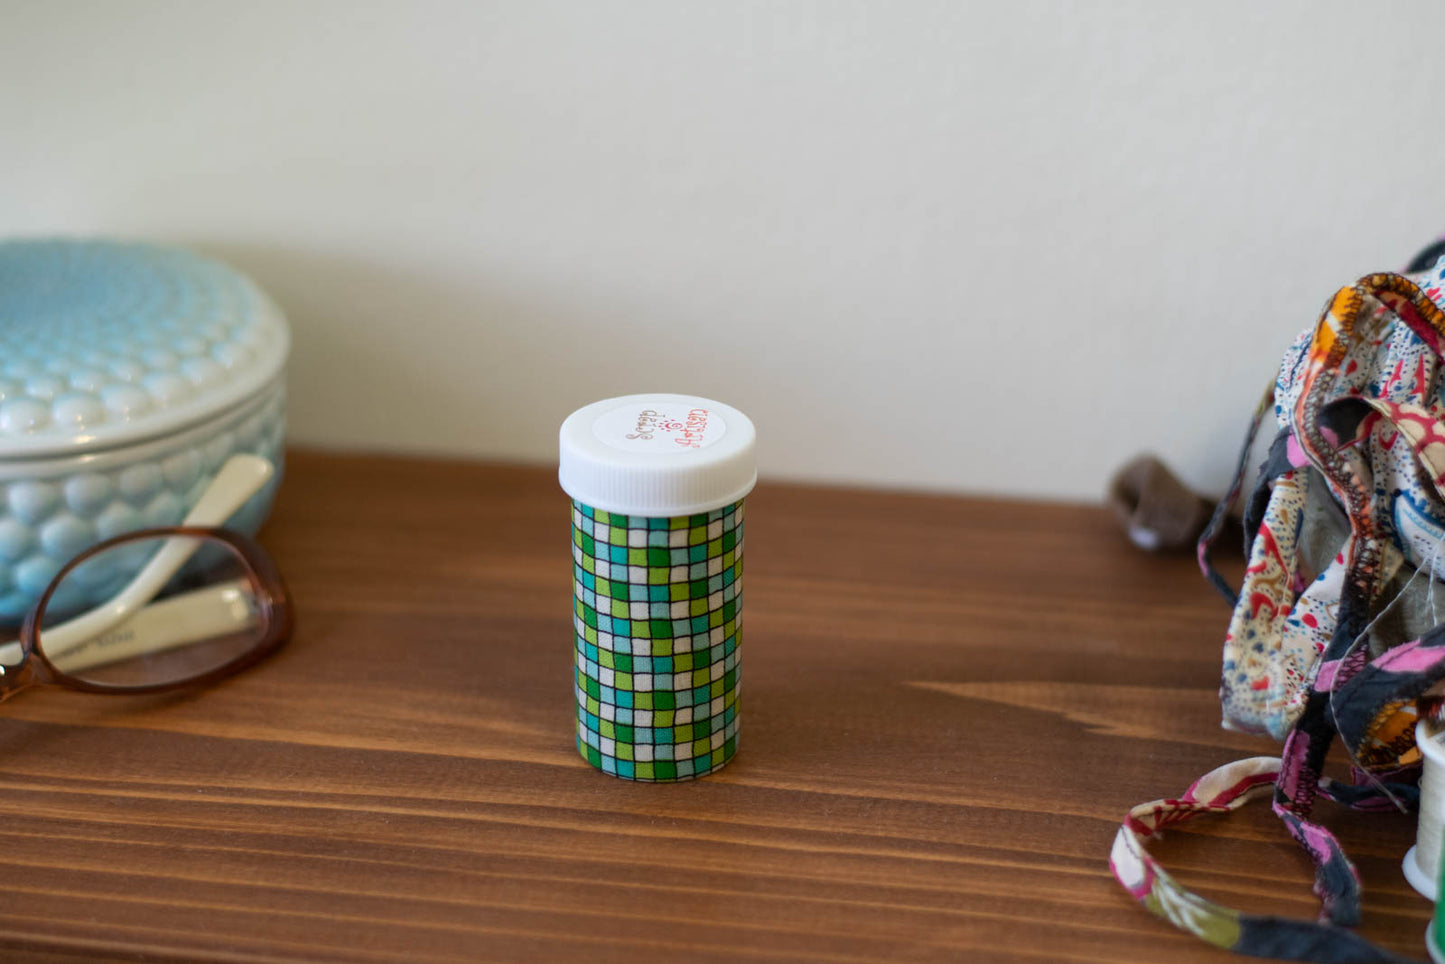 upcycled prescription bottle sewing kit — green tiles, 2.75" high, child proof lid, closed